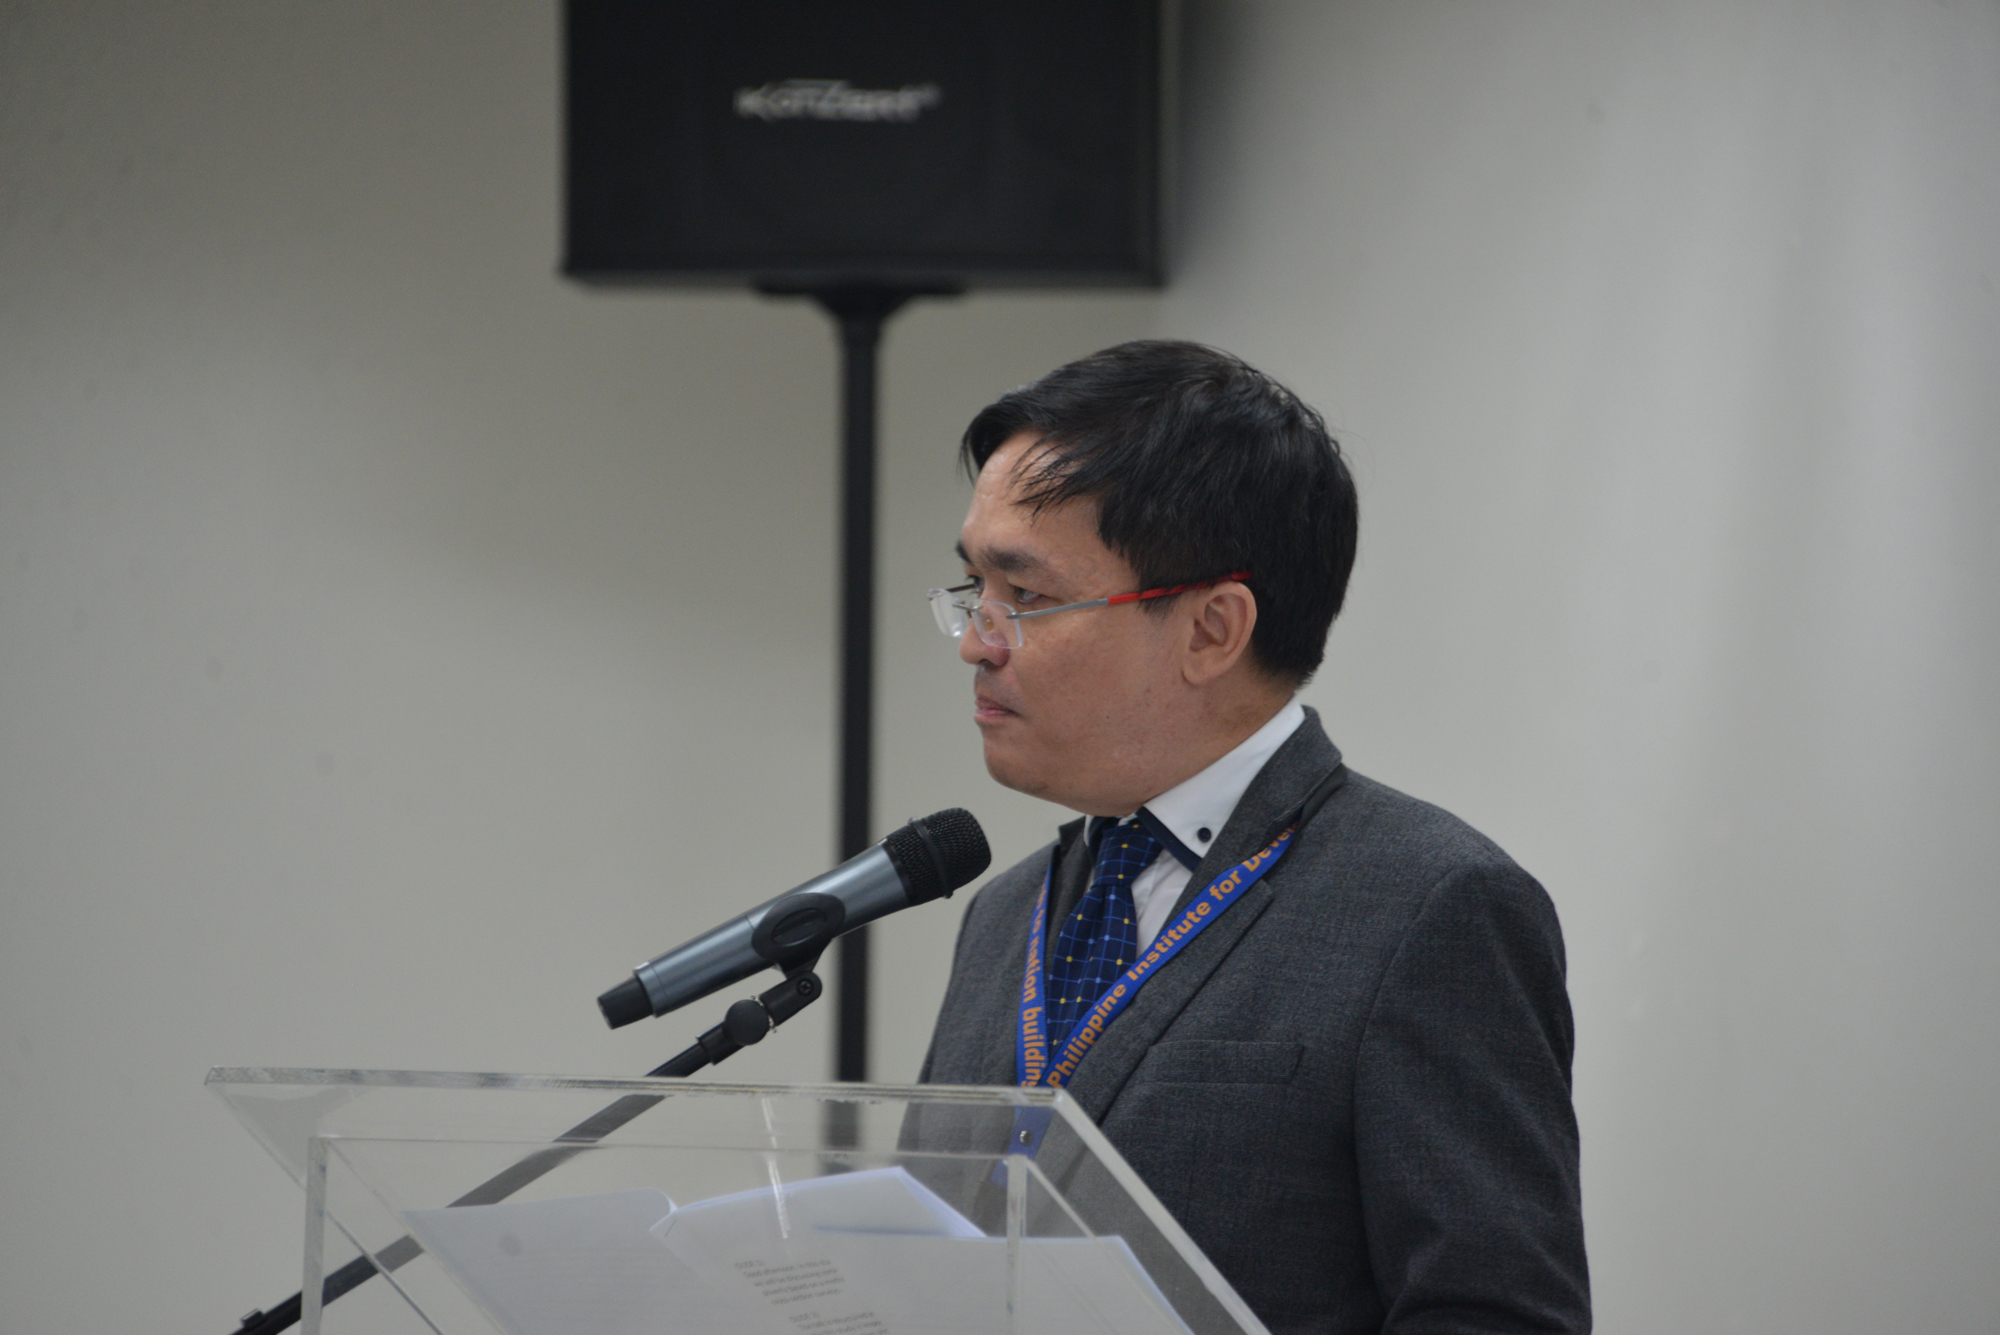 Public Seminar on Poverty and Child Stunting-pids-poverty-10-20190725.jpg